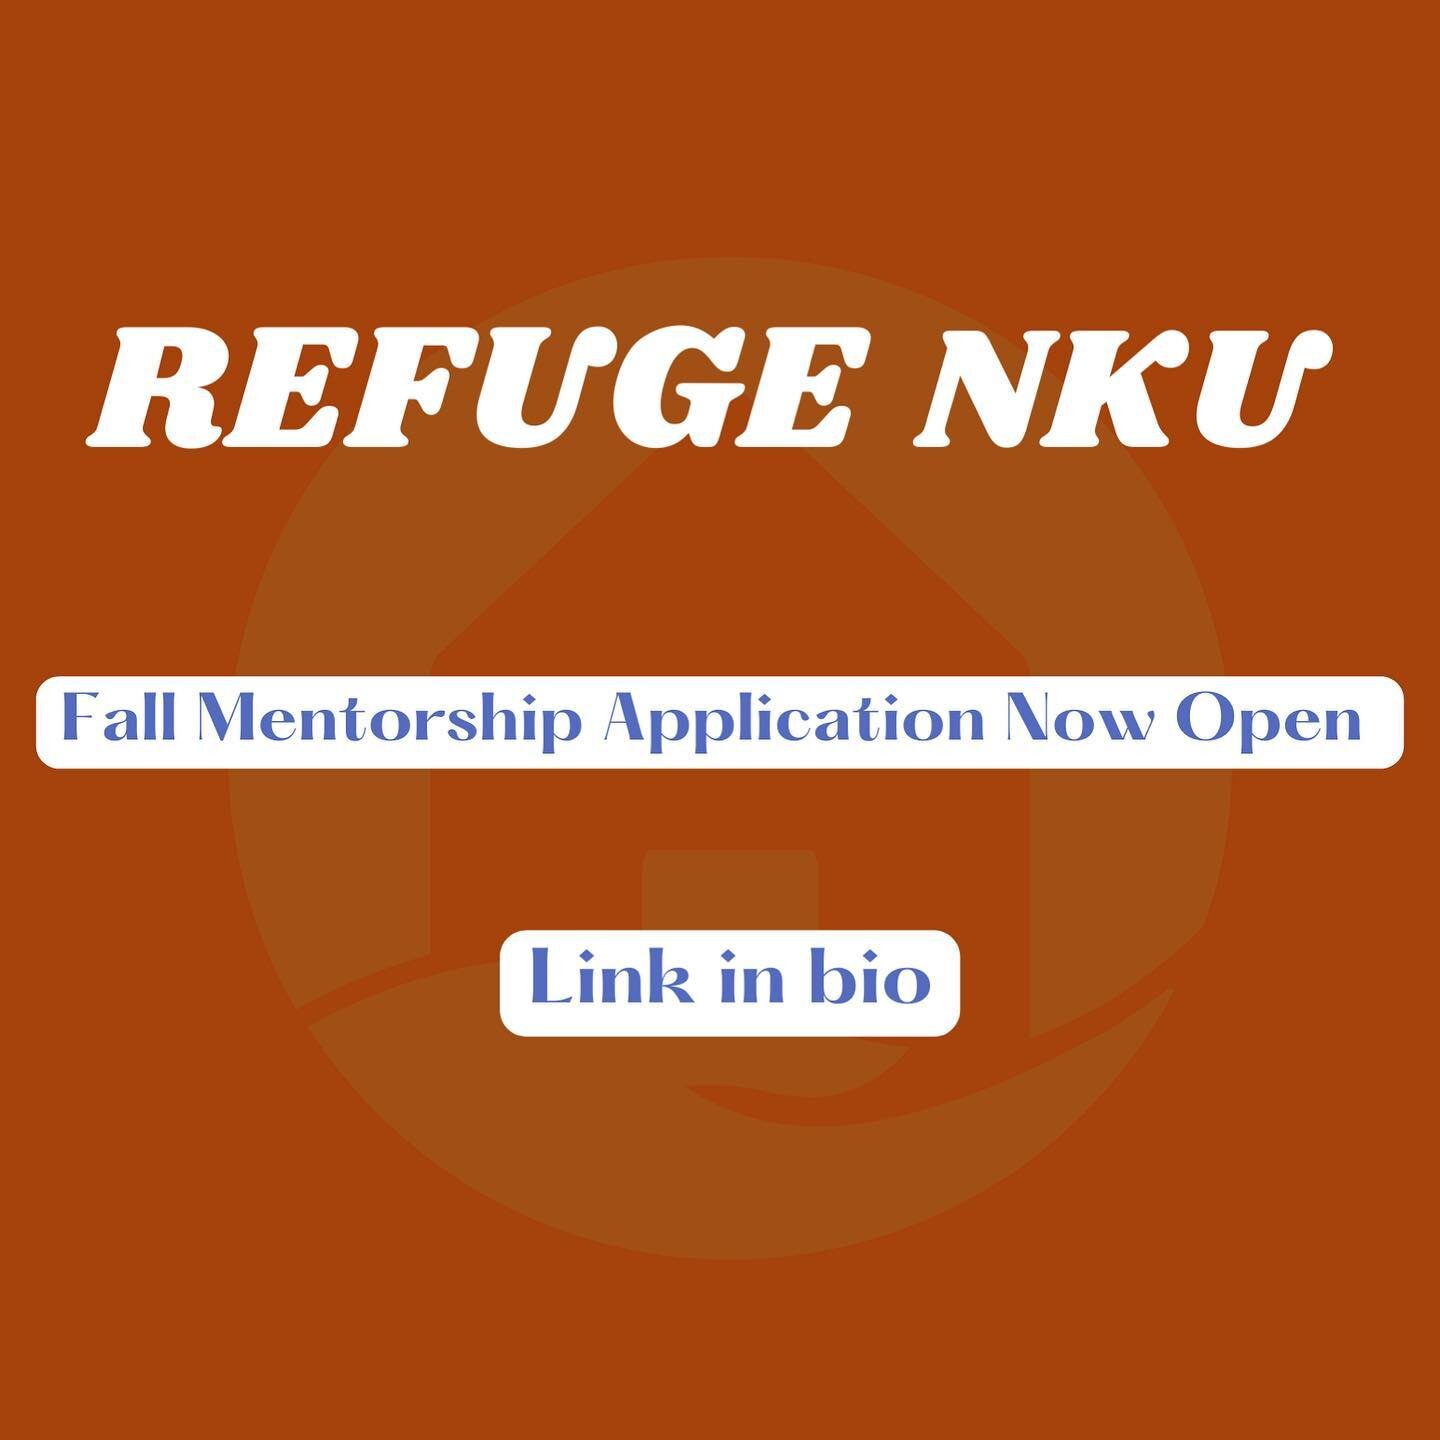 Become a mentor for refugee high school students with Refuge-NKU! Fall applications now open! link in bio